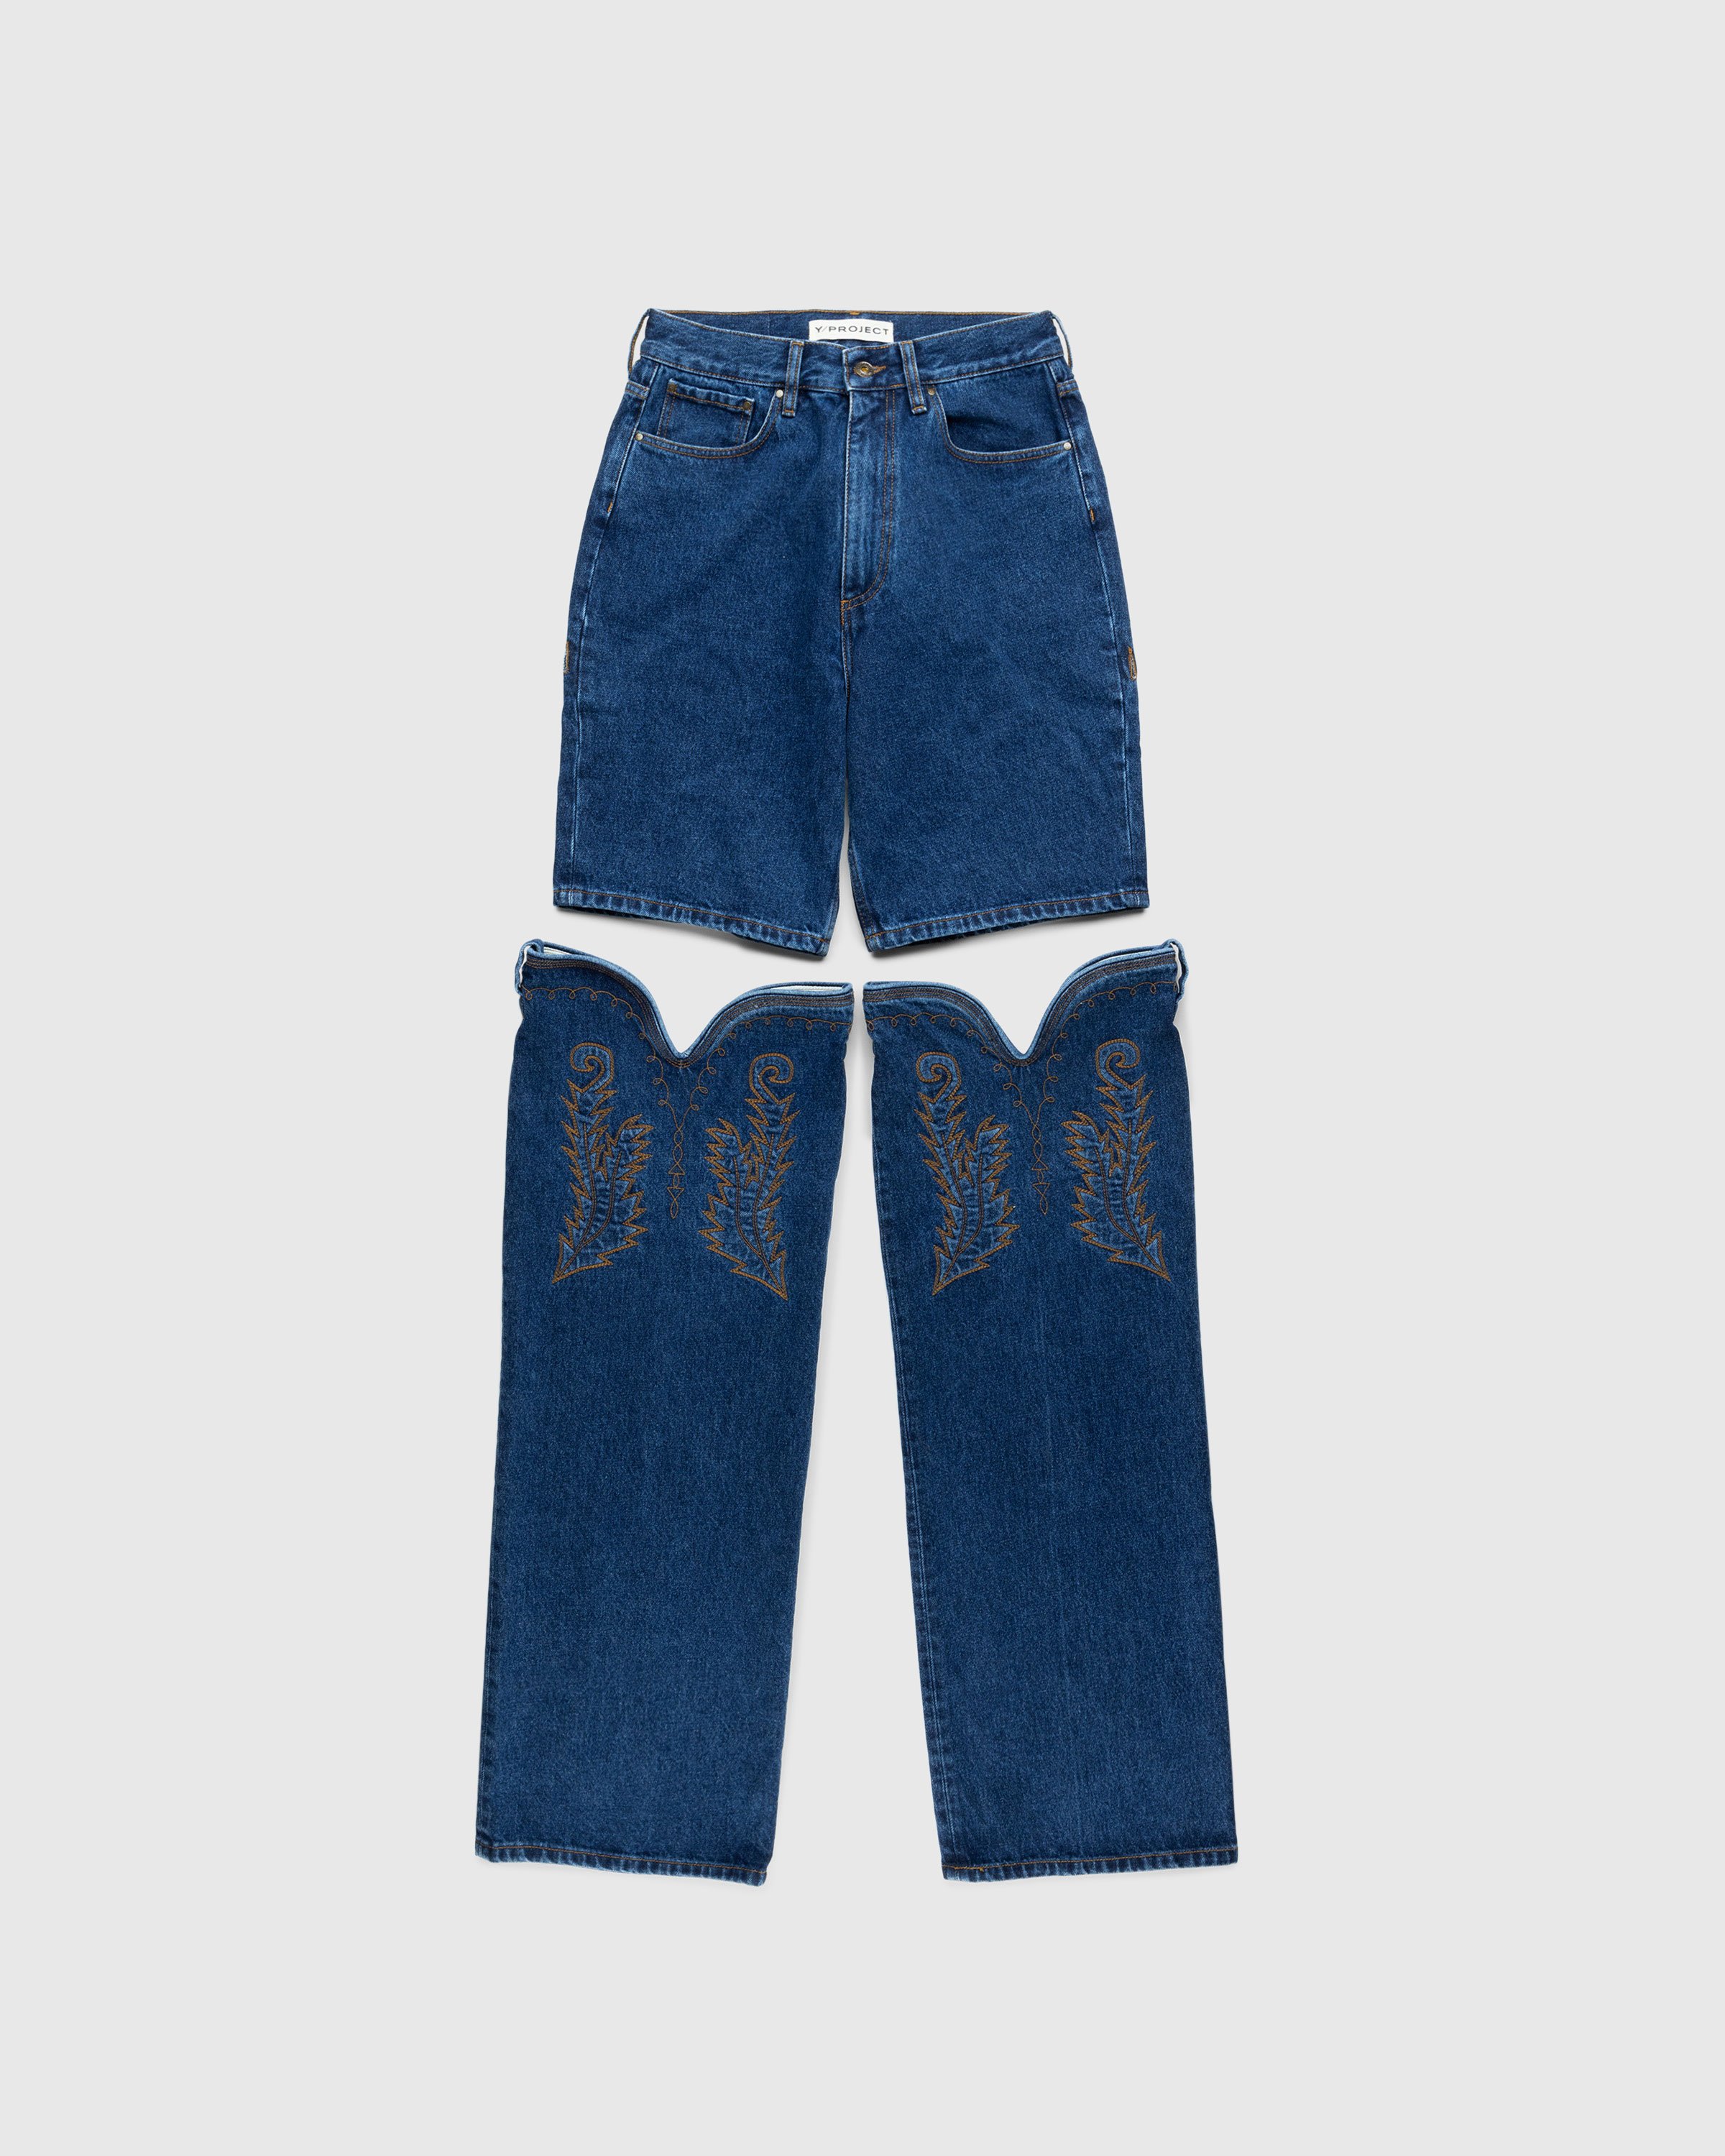 Y/Project - Classic Maxi Cowboy Cuff Jeans Navy - Clothing - Blue - Image 2